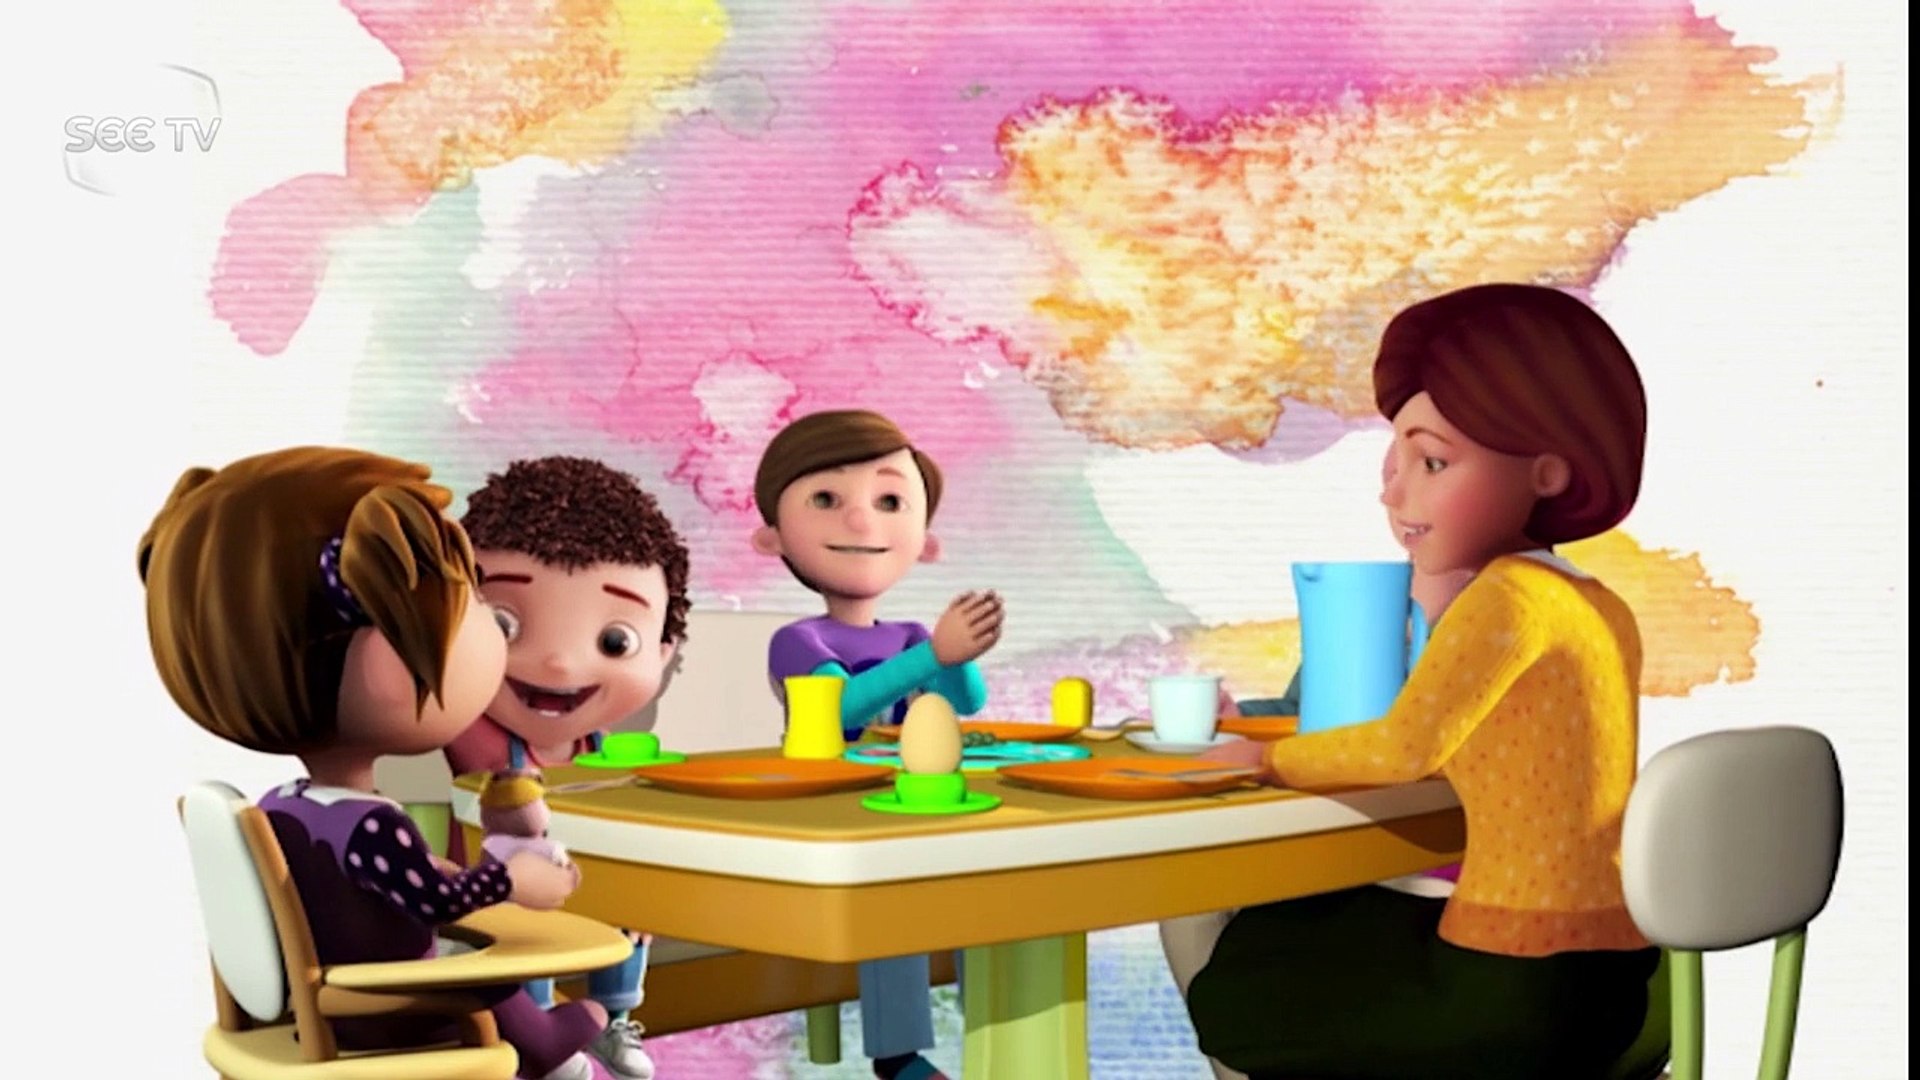 JAAN Cartoon Episode 7 in High Quality - For Kids - video Dailymotion